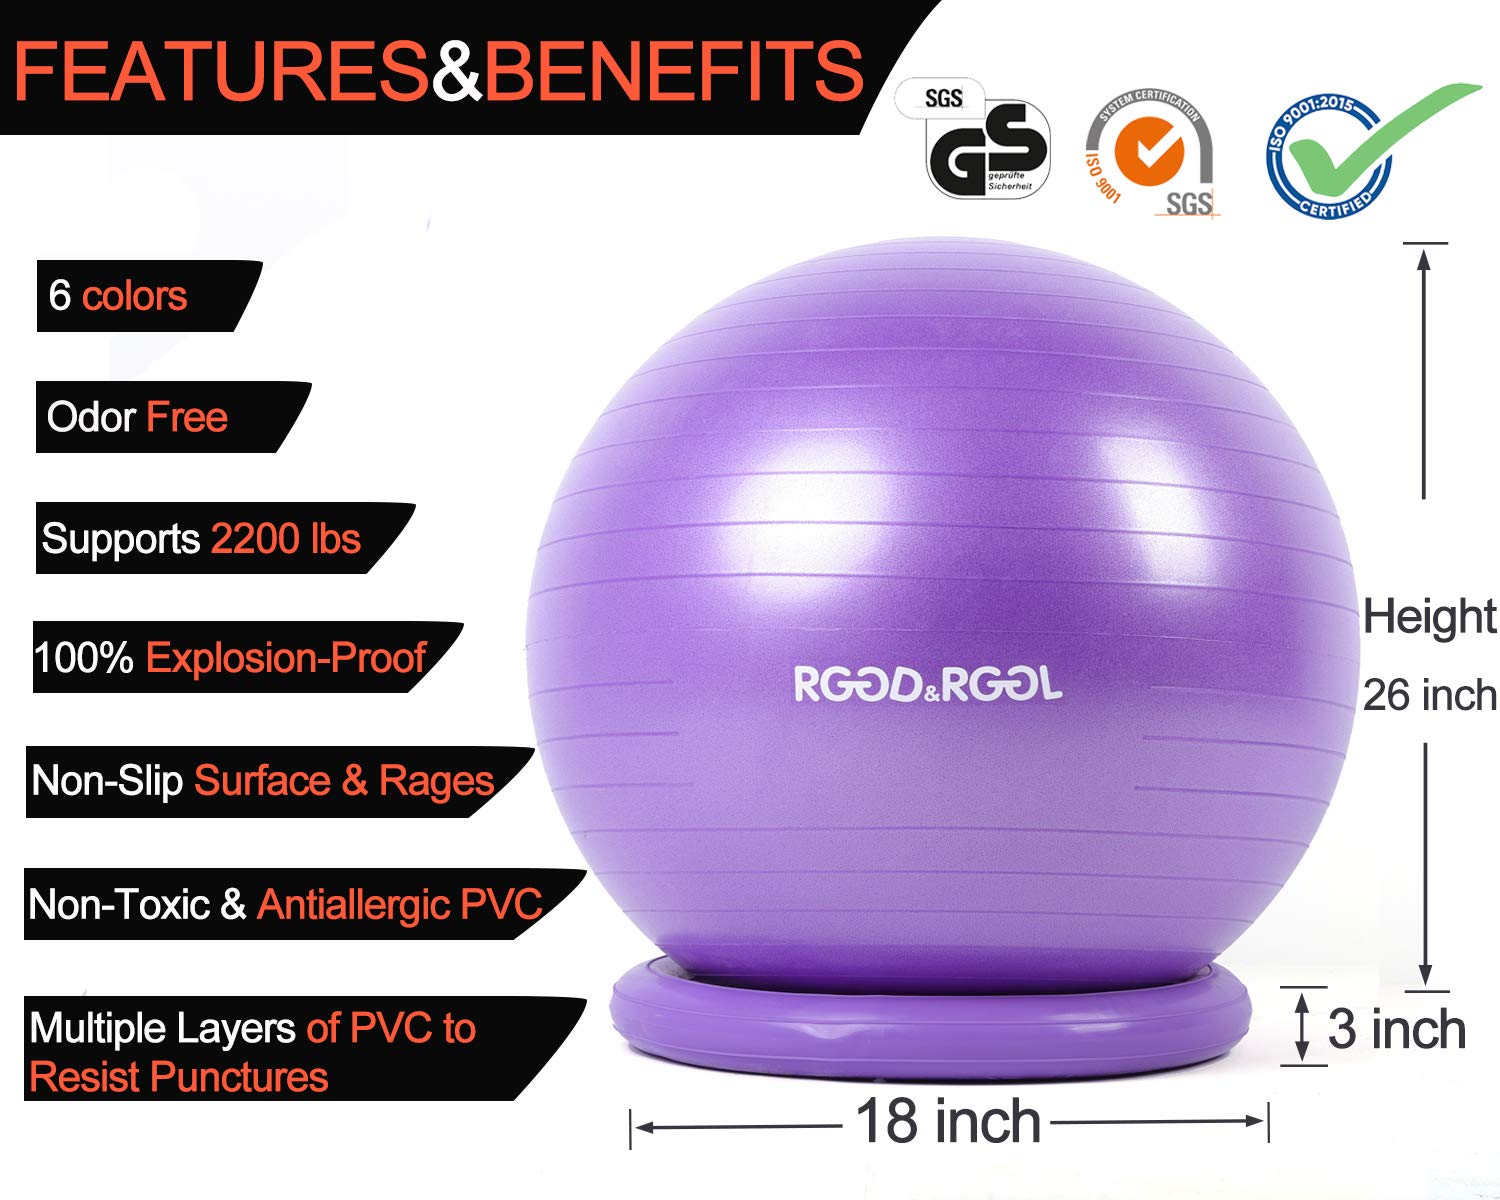 RGGD&RGGL Yoga Ball Chair, Exercise Ball with Leak-Proof Design, Stability Ring&2 Adjustable Resistance Bands for Any Fitness Level, 1.5 Times Thicker Swiss Ball for Home&Gym&Office&Pregnancy (65 cm)